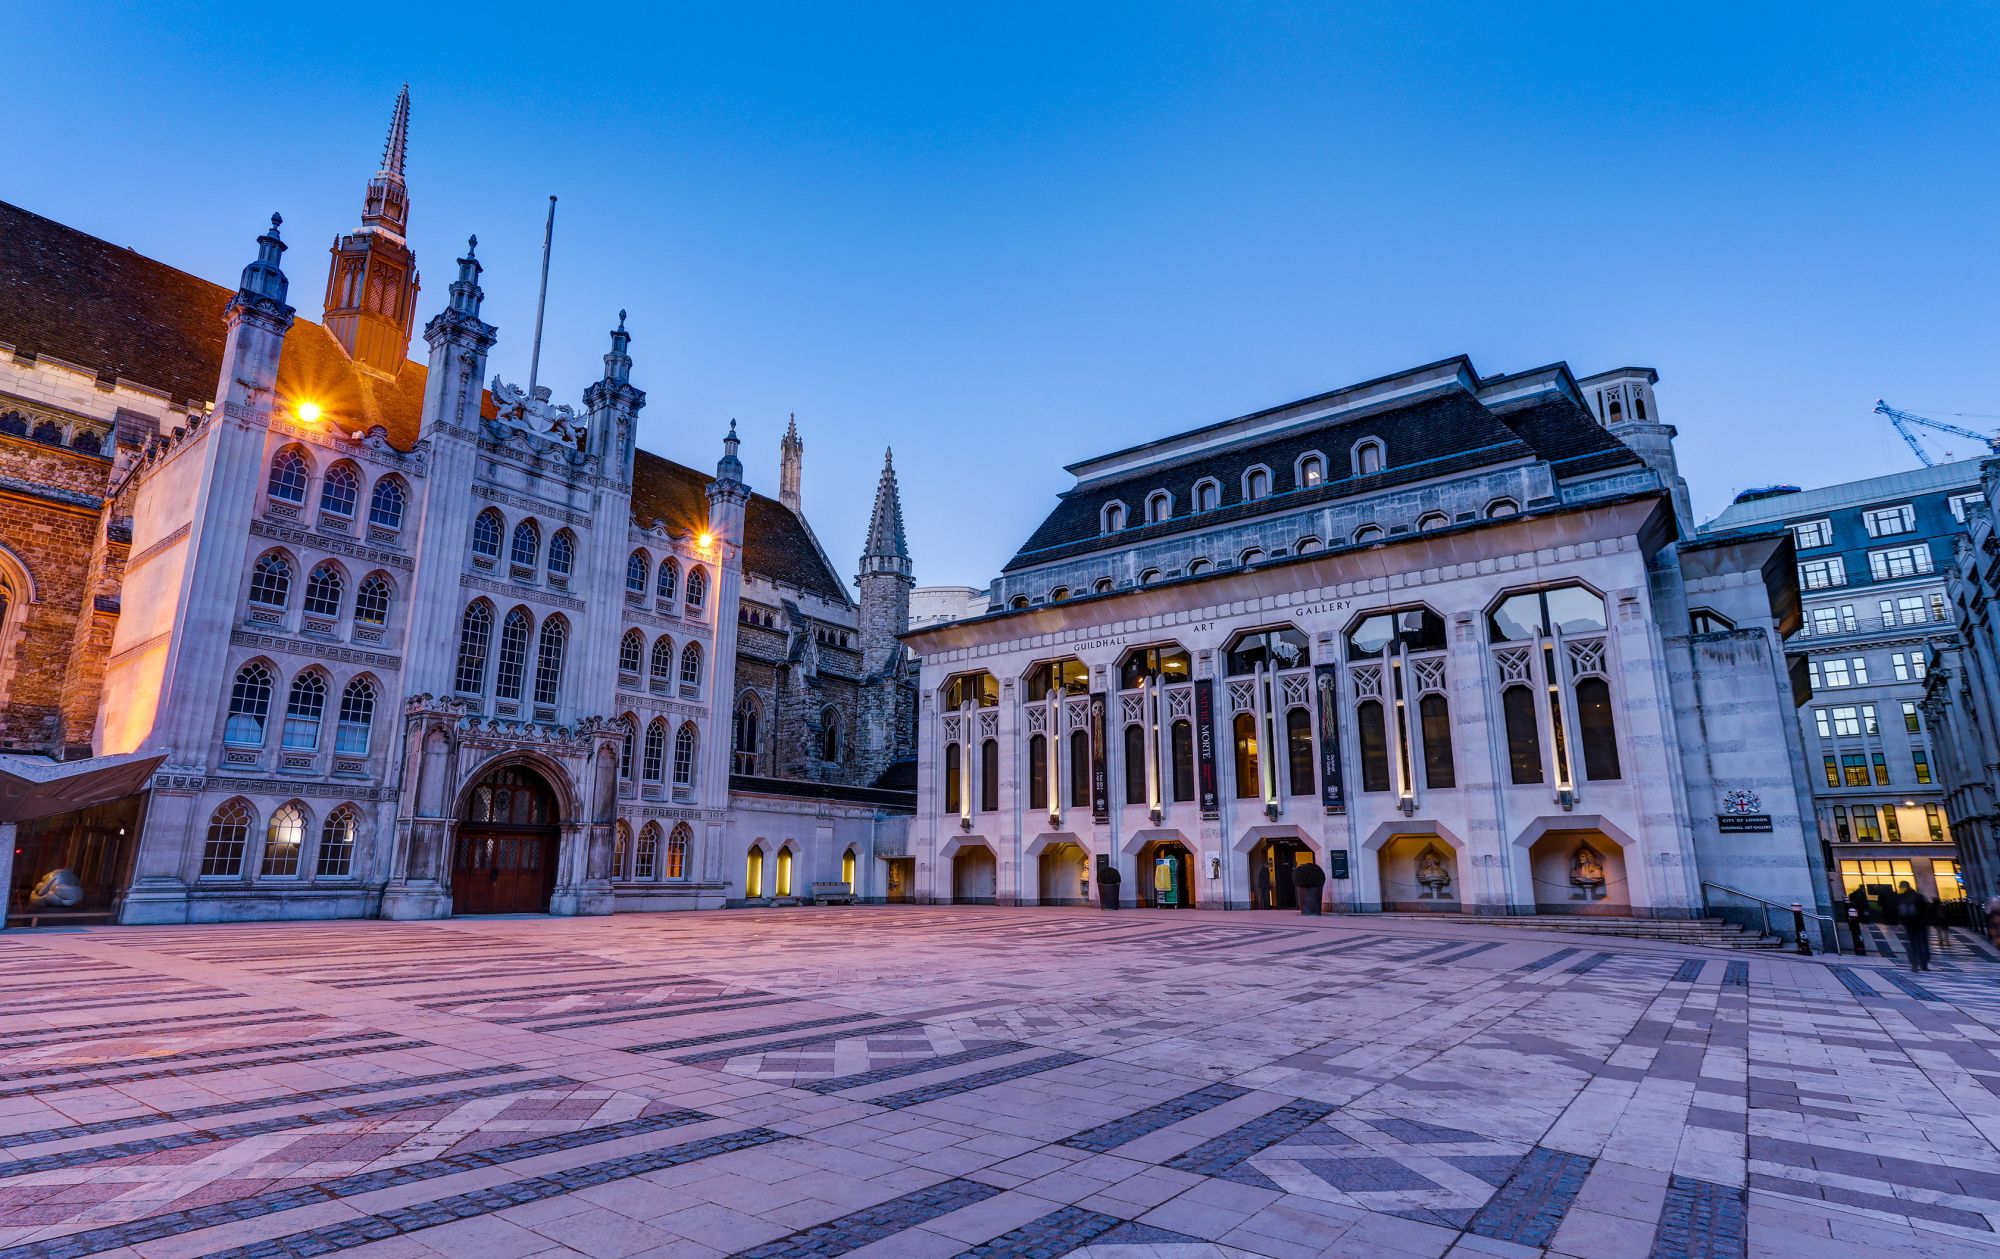 landscape image showing the outside of the Guildhall and Art Gallery at dusk